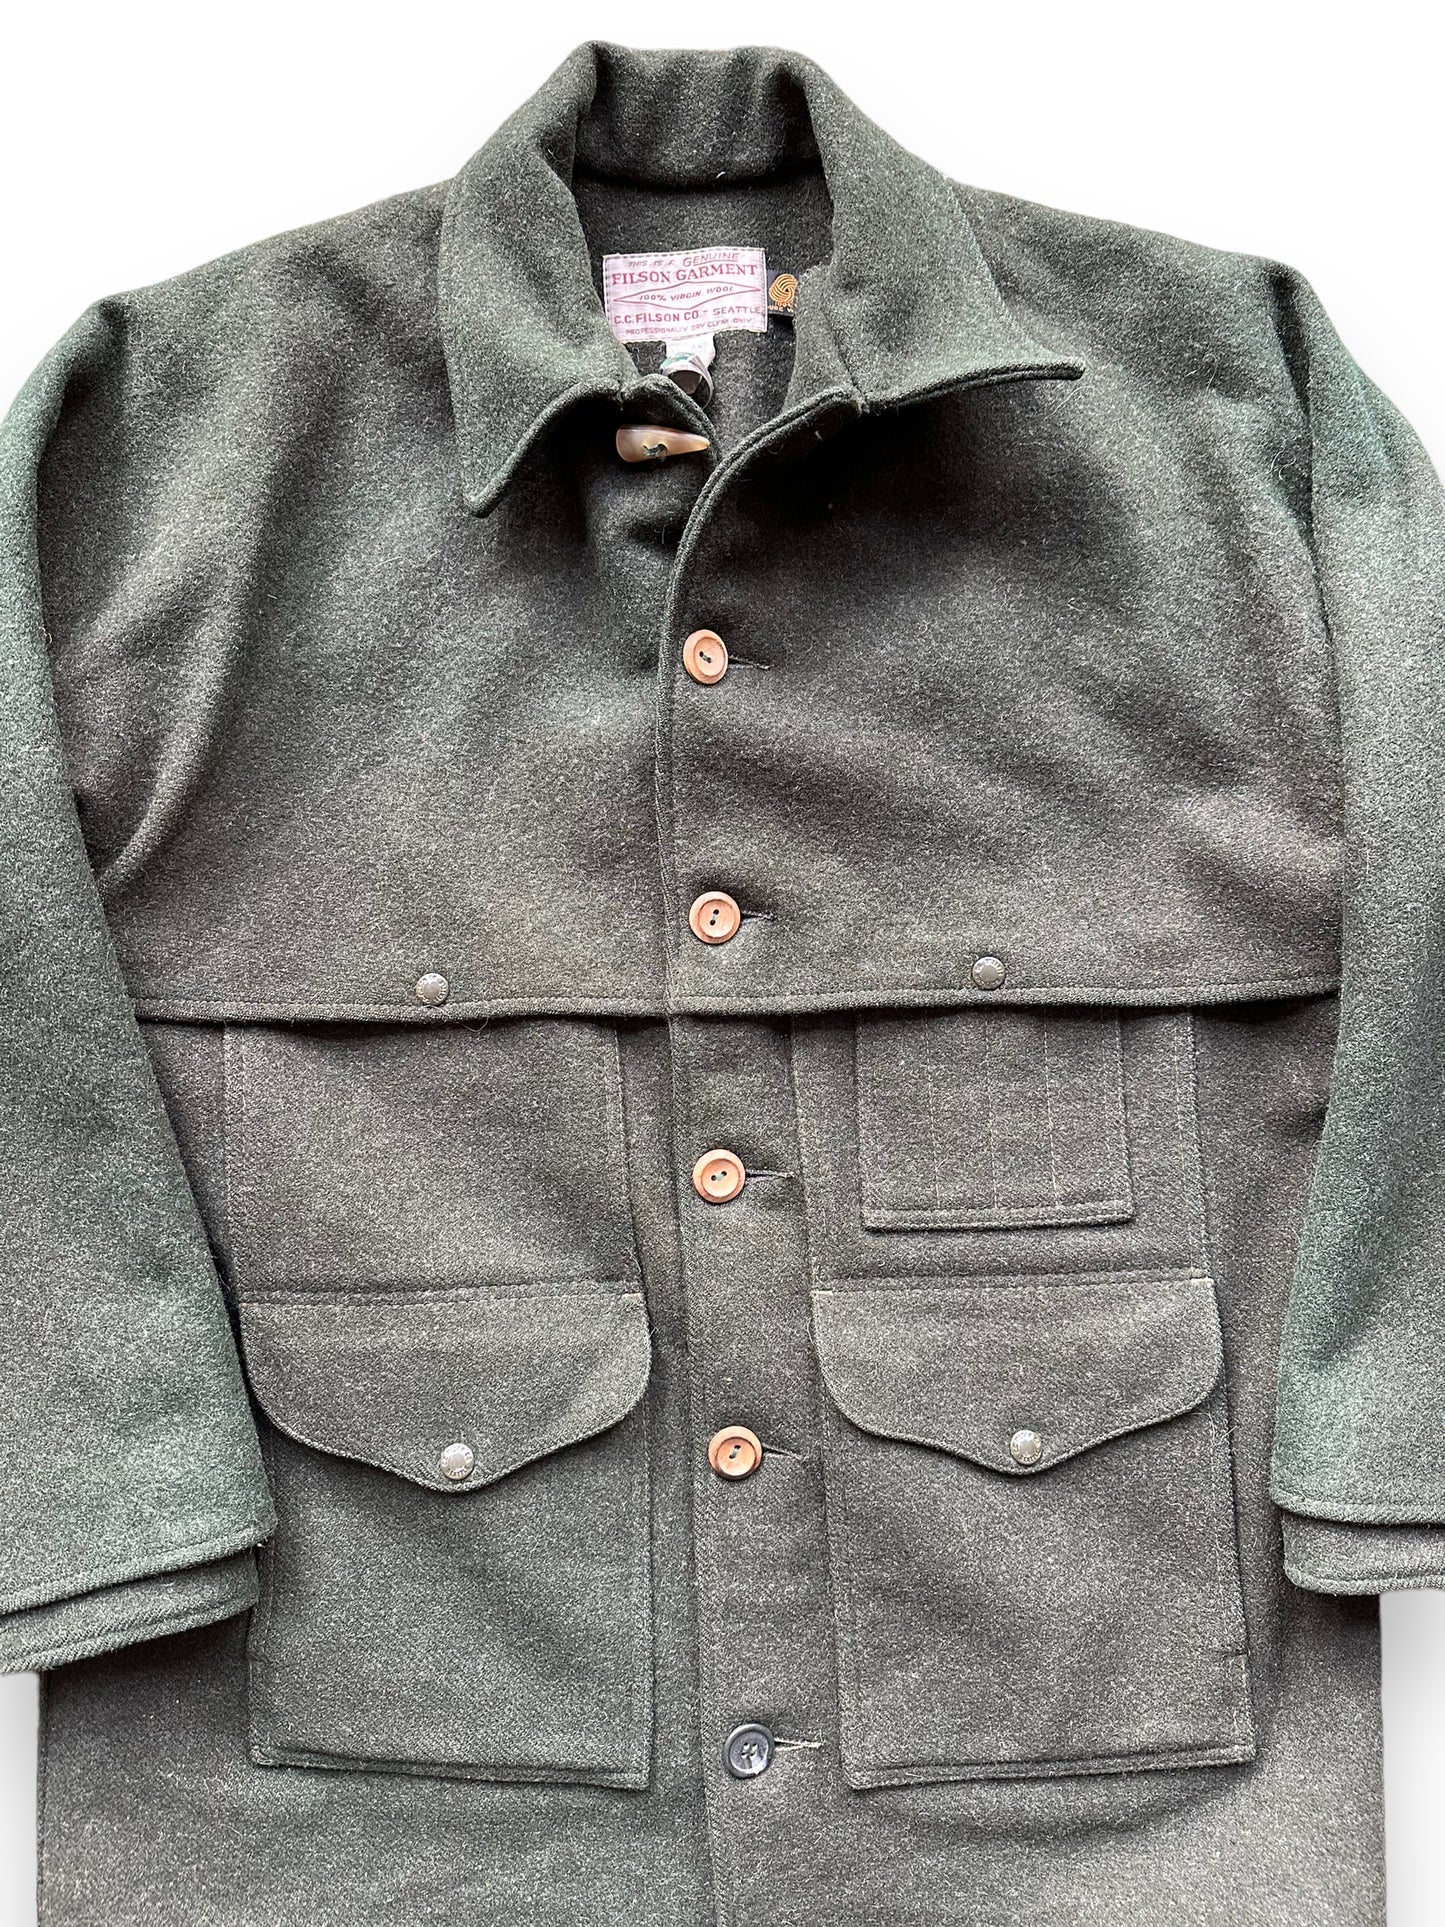 Front Close Up of Vintage Filson Forest Green Double Mackinaw Cruiser SZ 46 XL |  Barn Owl Vintage Goods | Vintage Workwear Seattle